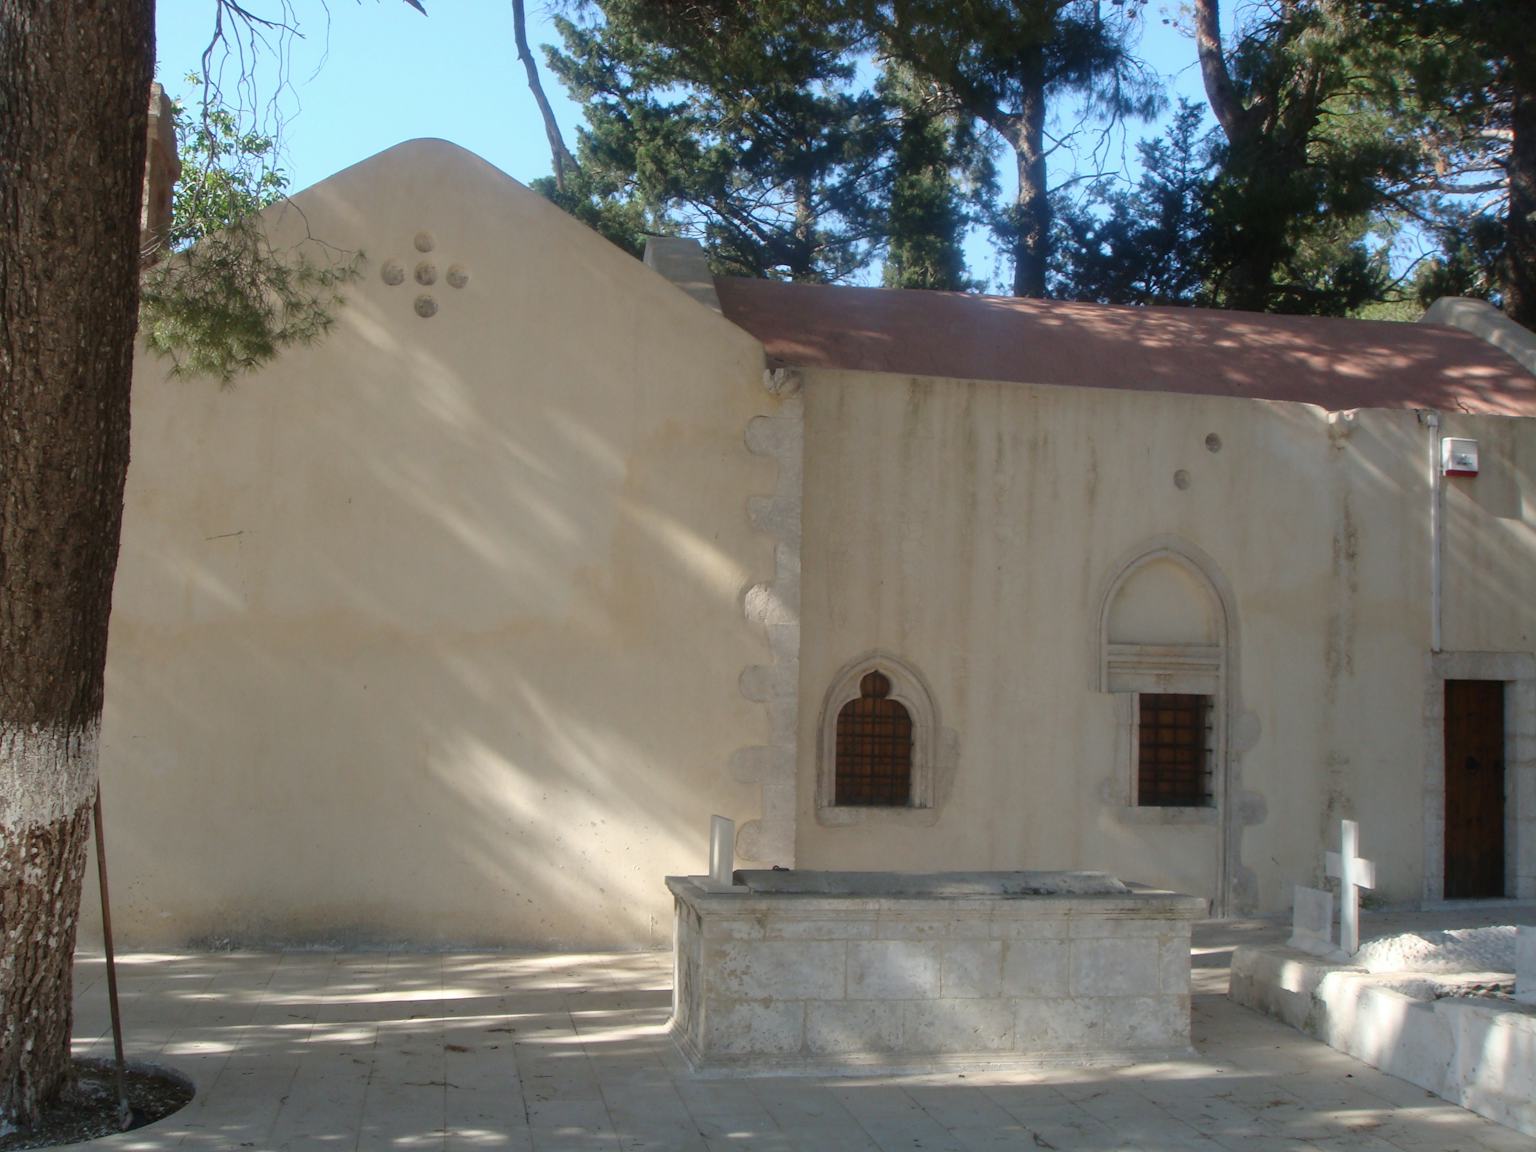 The Dormition of the Virgin Mary Convent in Viannos